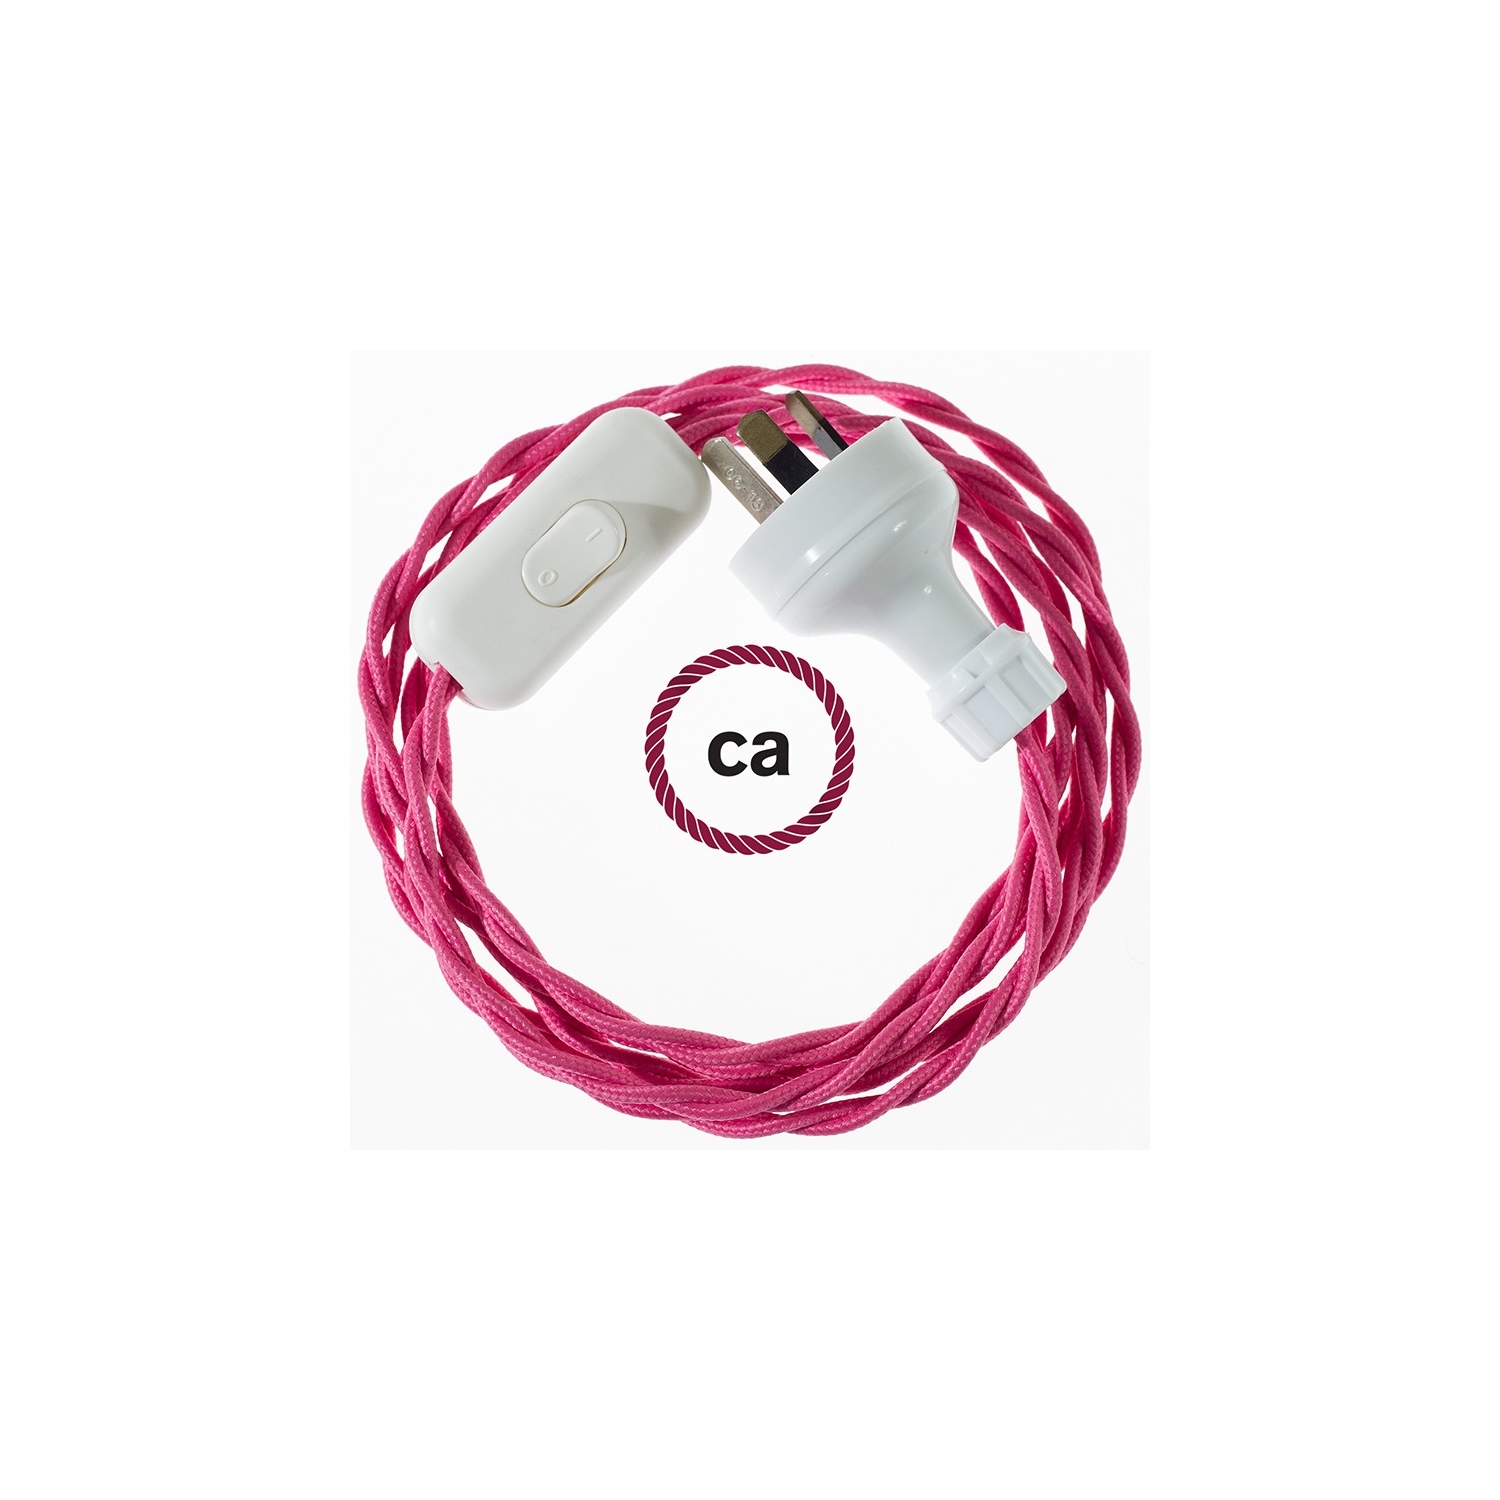 Wiring Fuchsia Rayon textile cable TM08 - 1.80 mt